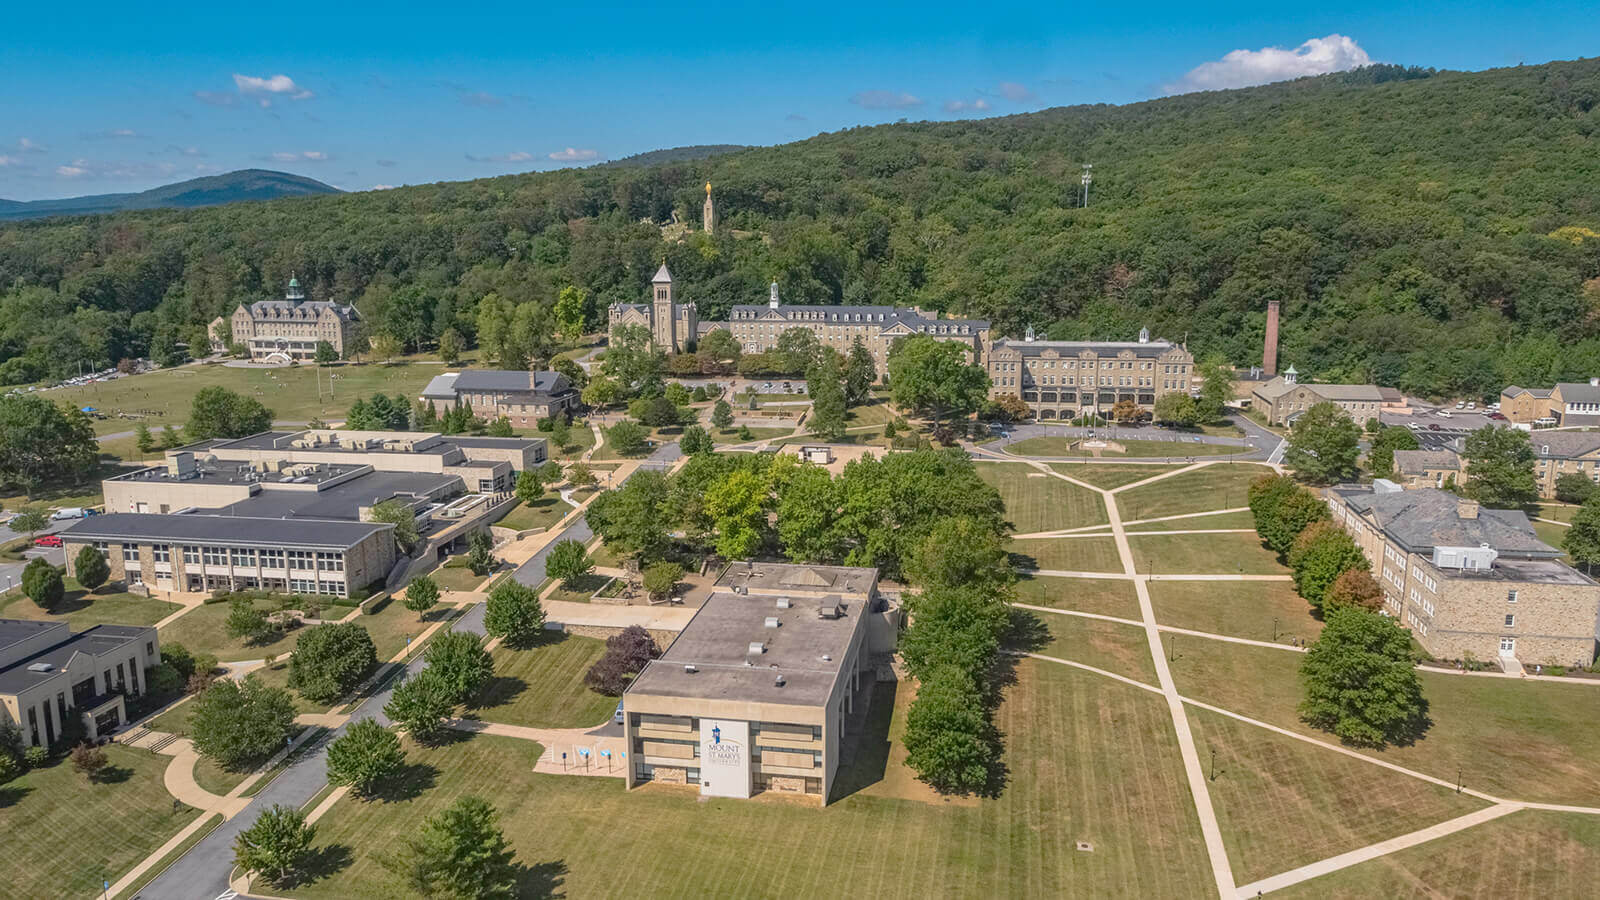 Mount Saint Marys University - A Catholic College with a Difference